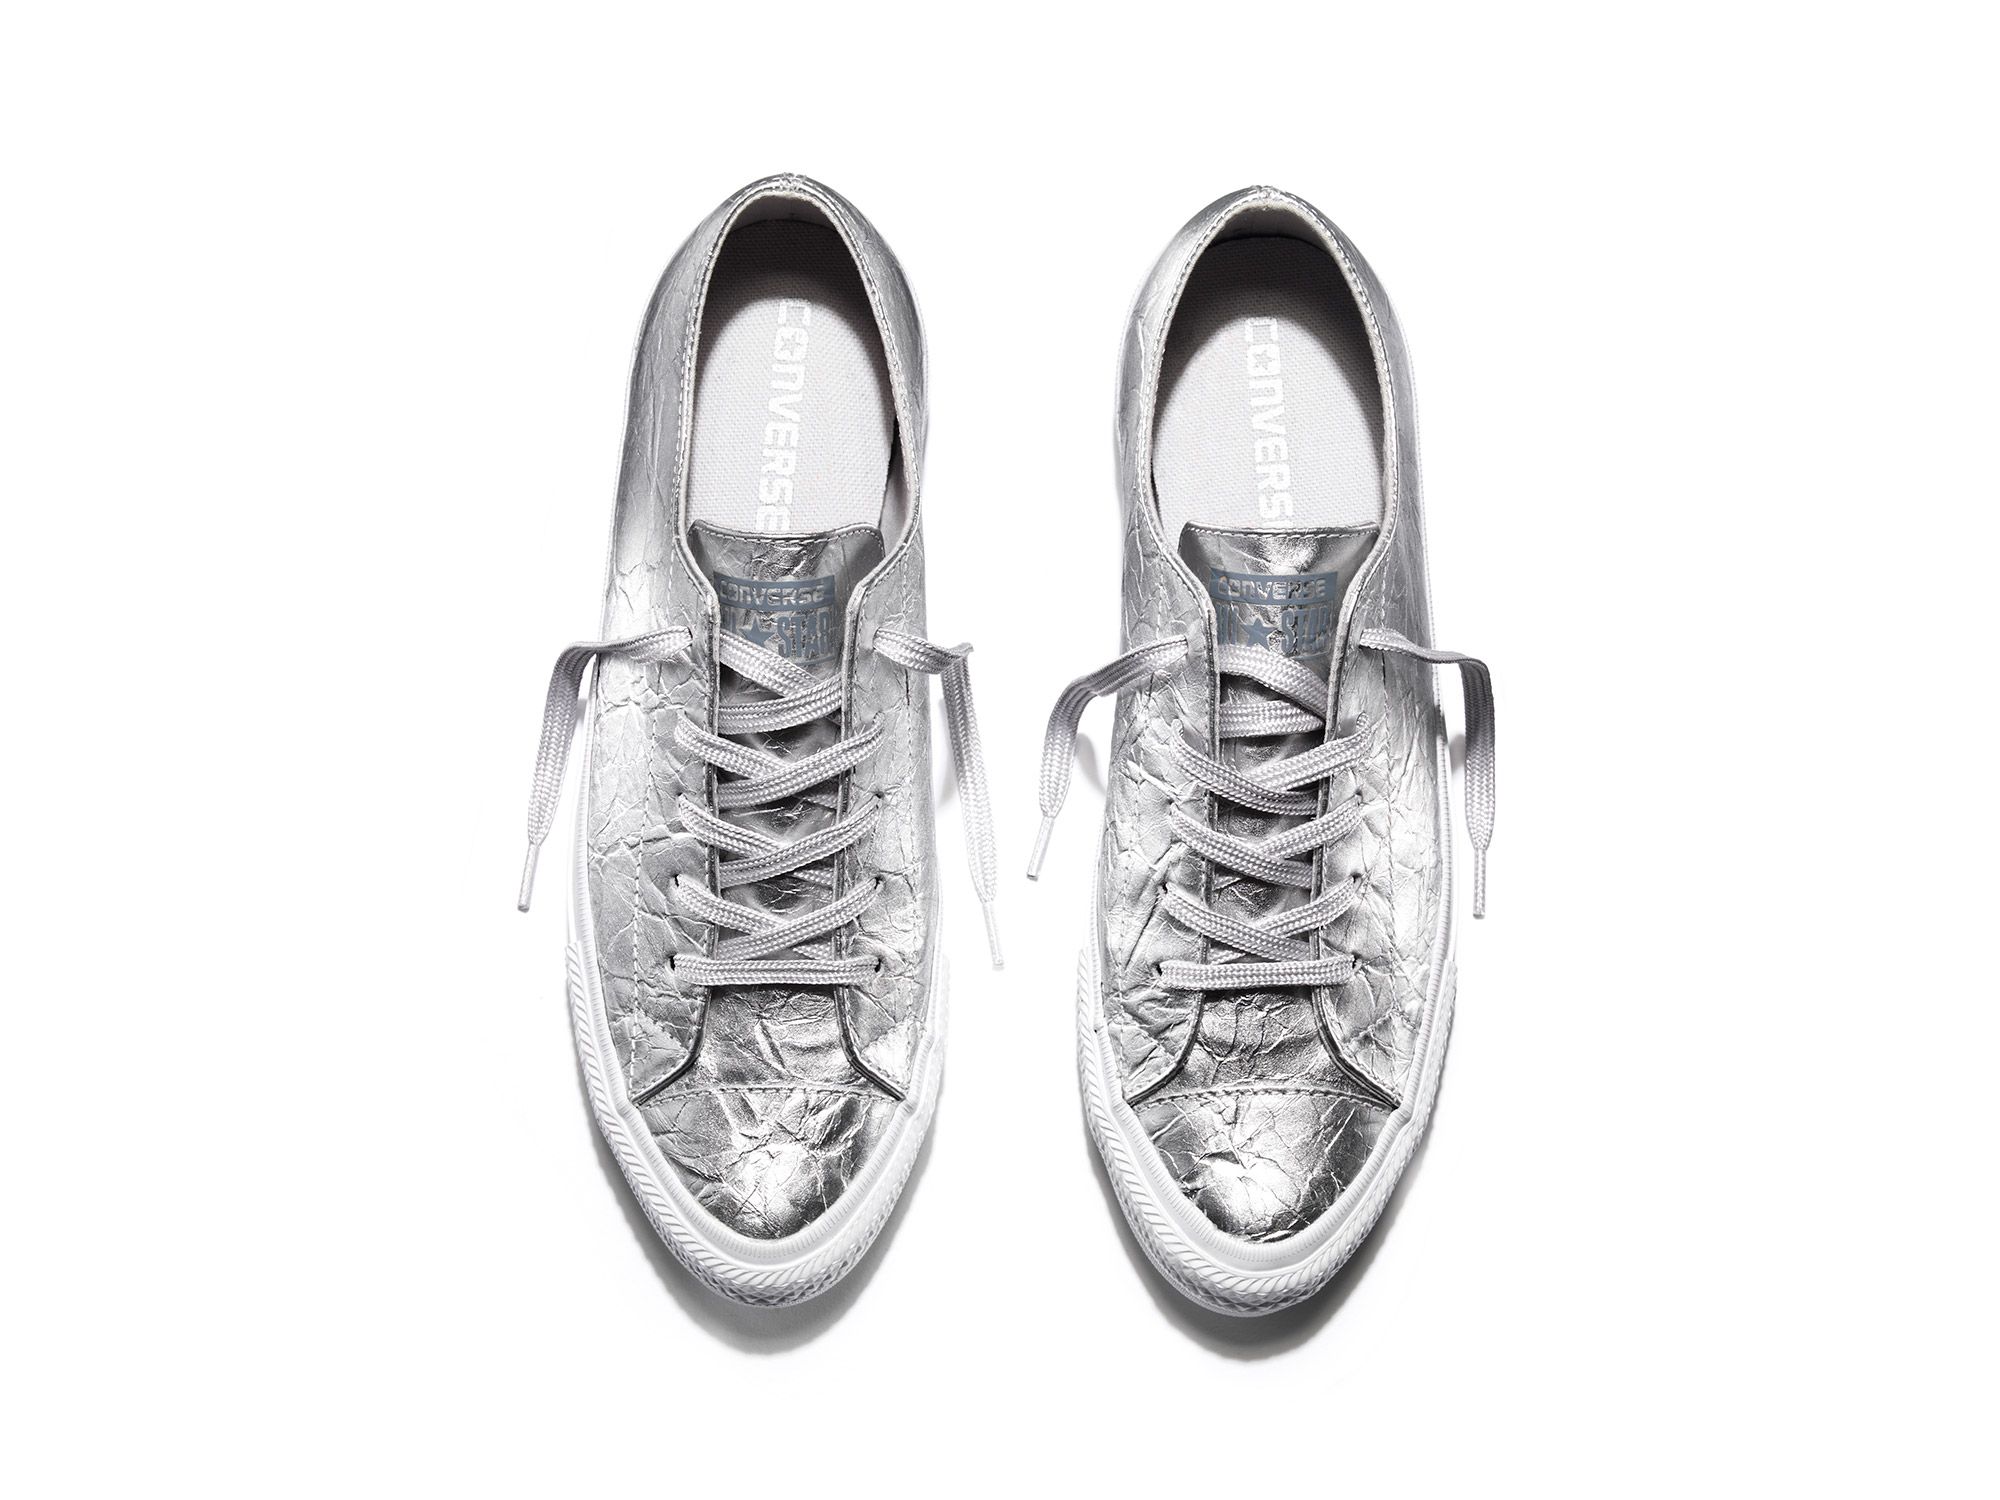 Downtown white/silver trainer  Silver trainers, Black leather